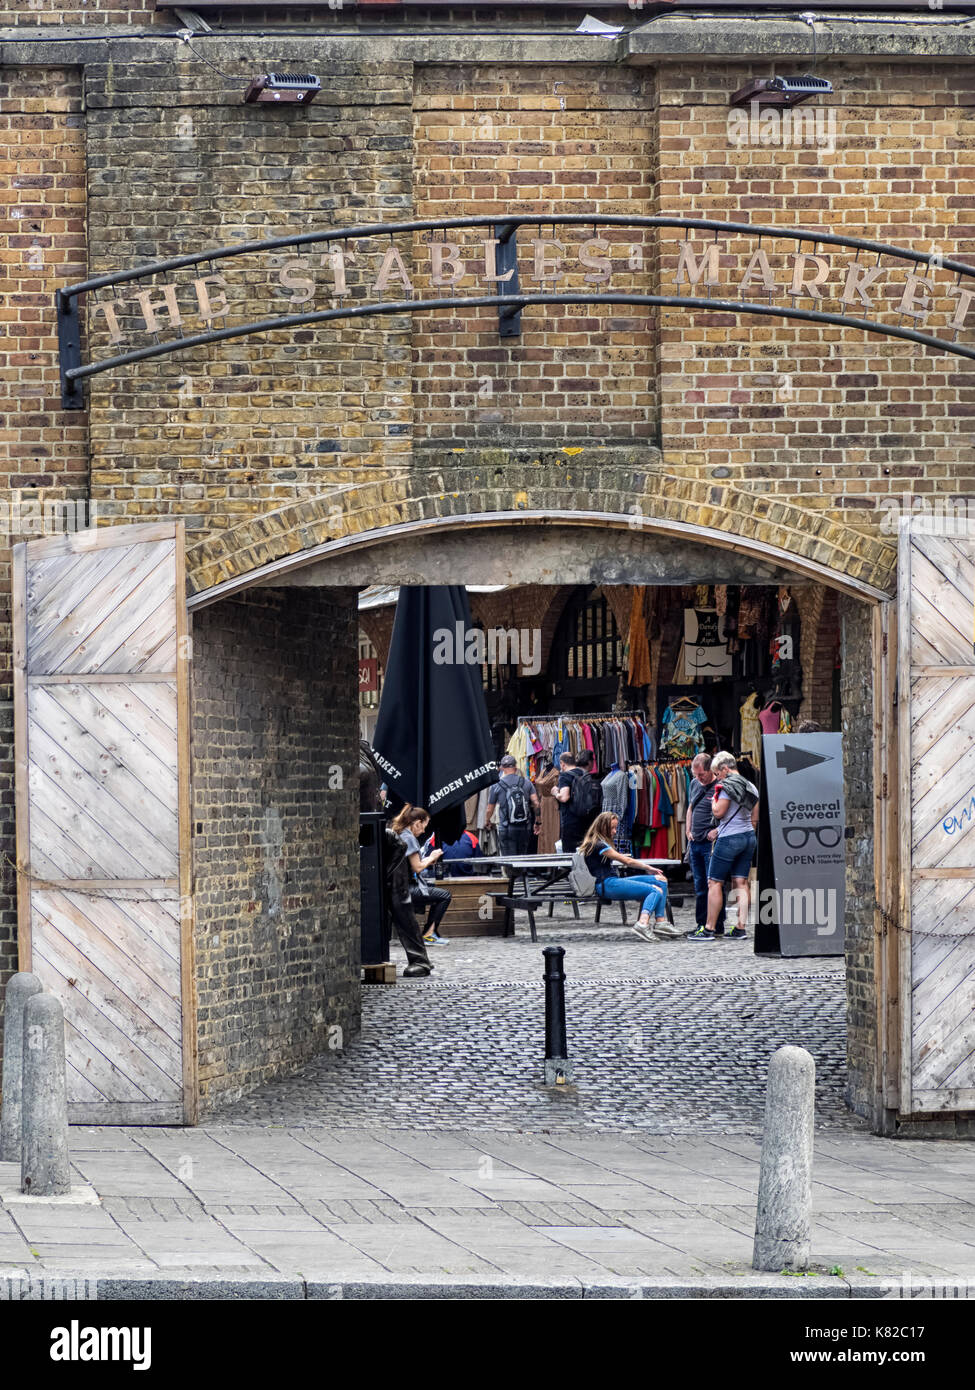 LONDON, UK - AUGUST 12, 2017:  Arched entrance to the Stables market with sign at Camden Stock Photo